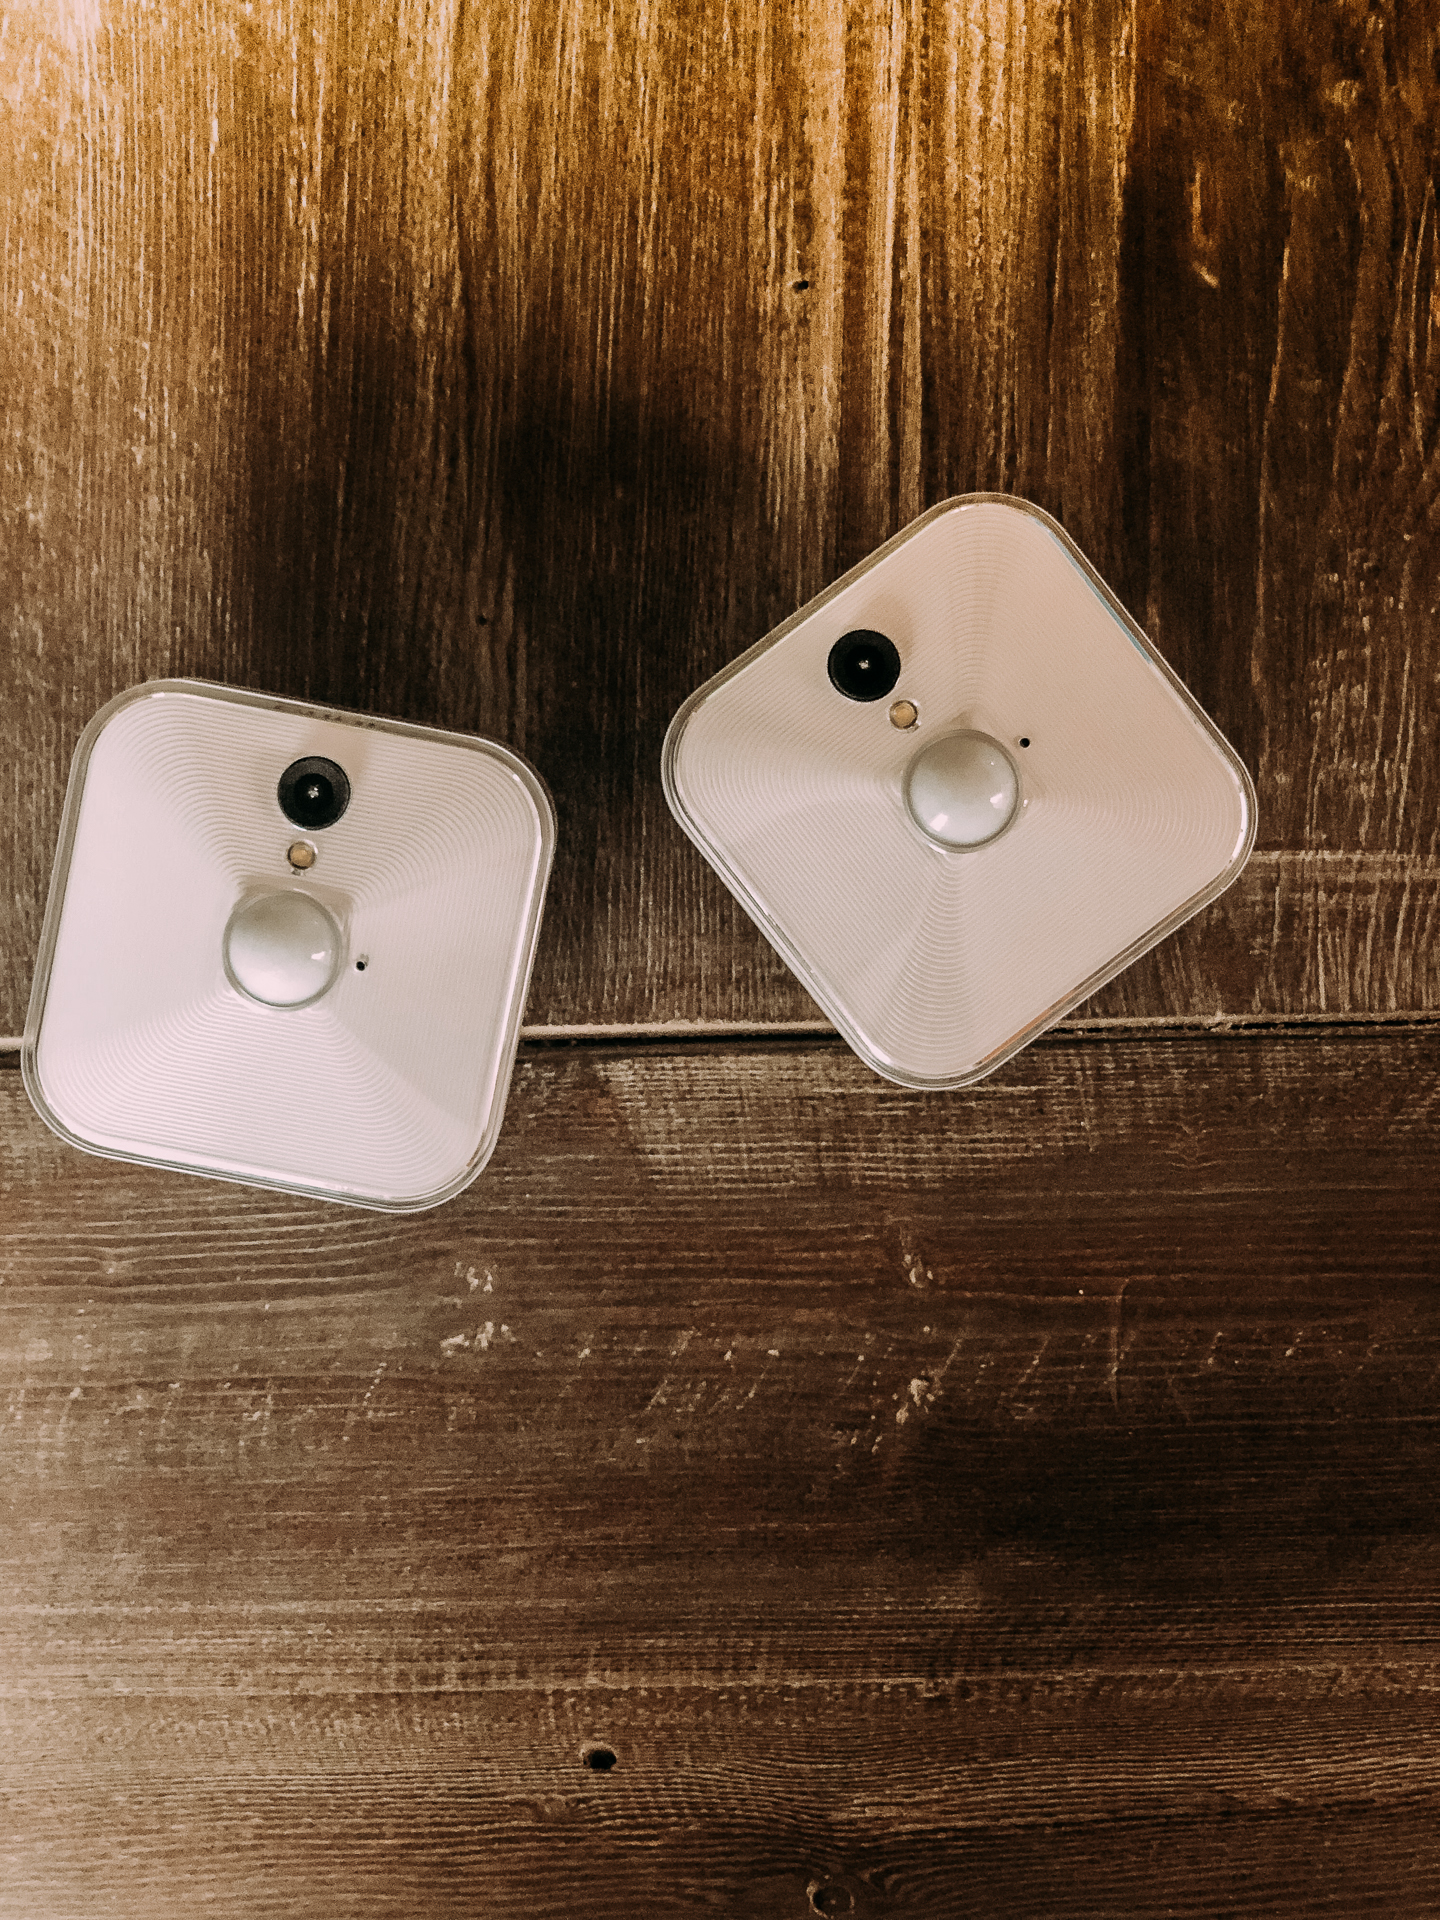 The New Affordable Security System You Need Now: Blink Home Security